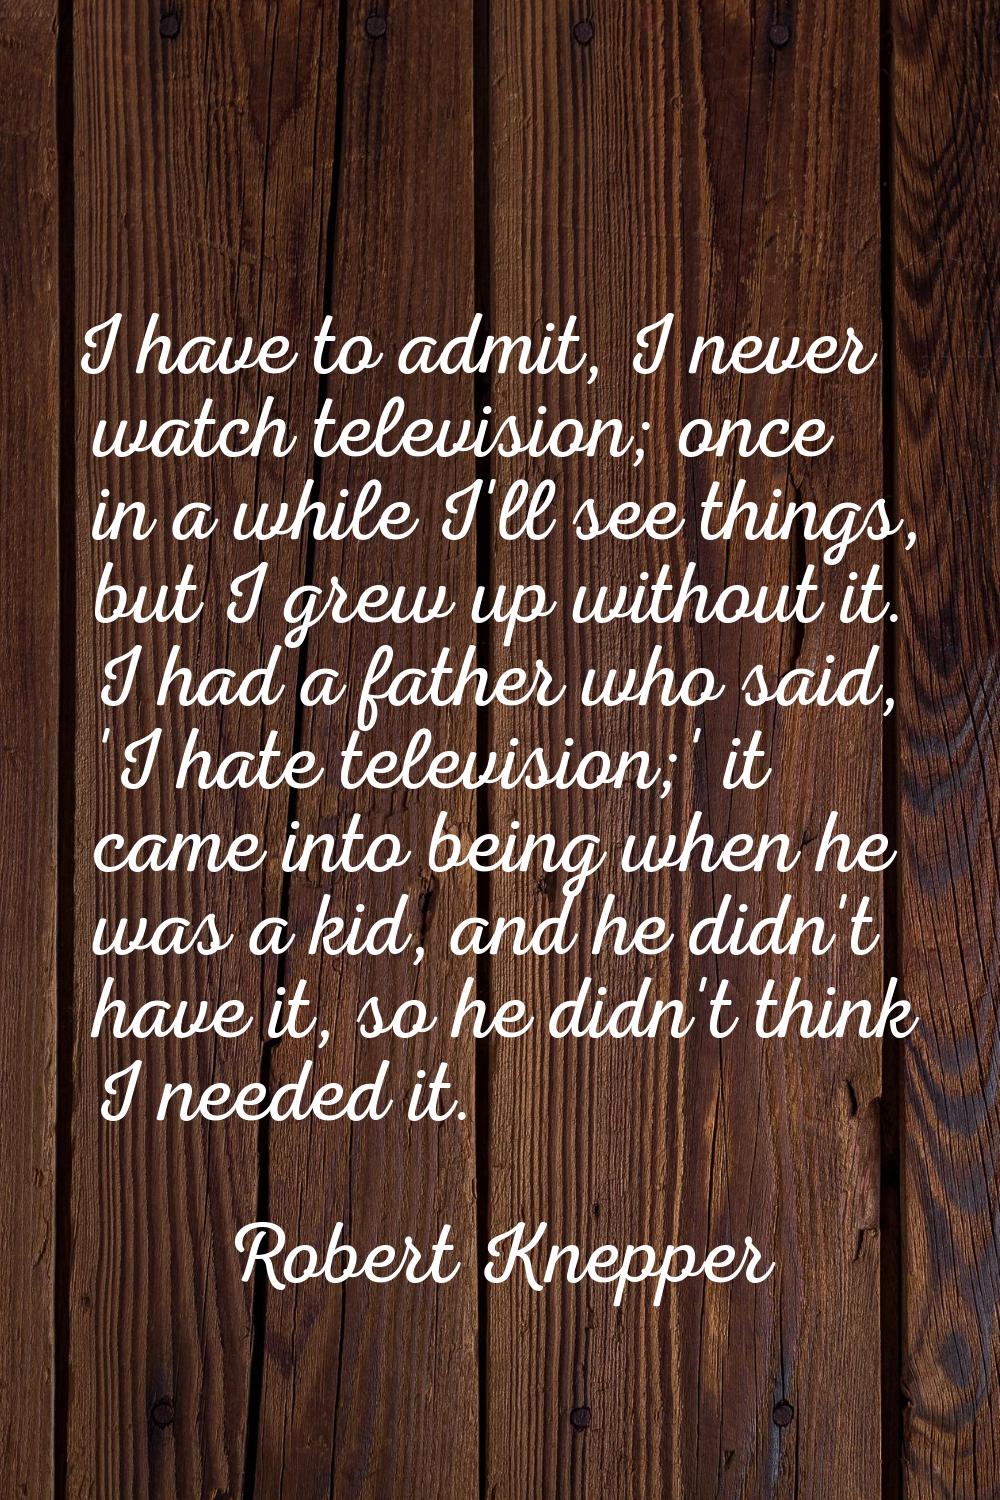 I have to admit, I never watch television; once in a while I'll see things, but I grew up without i